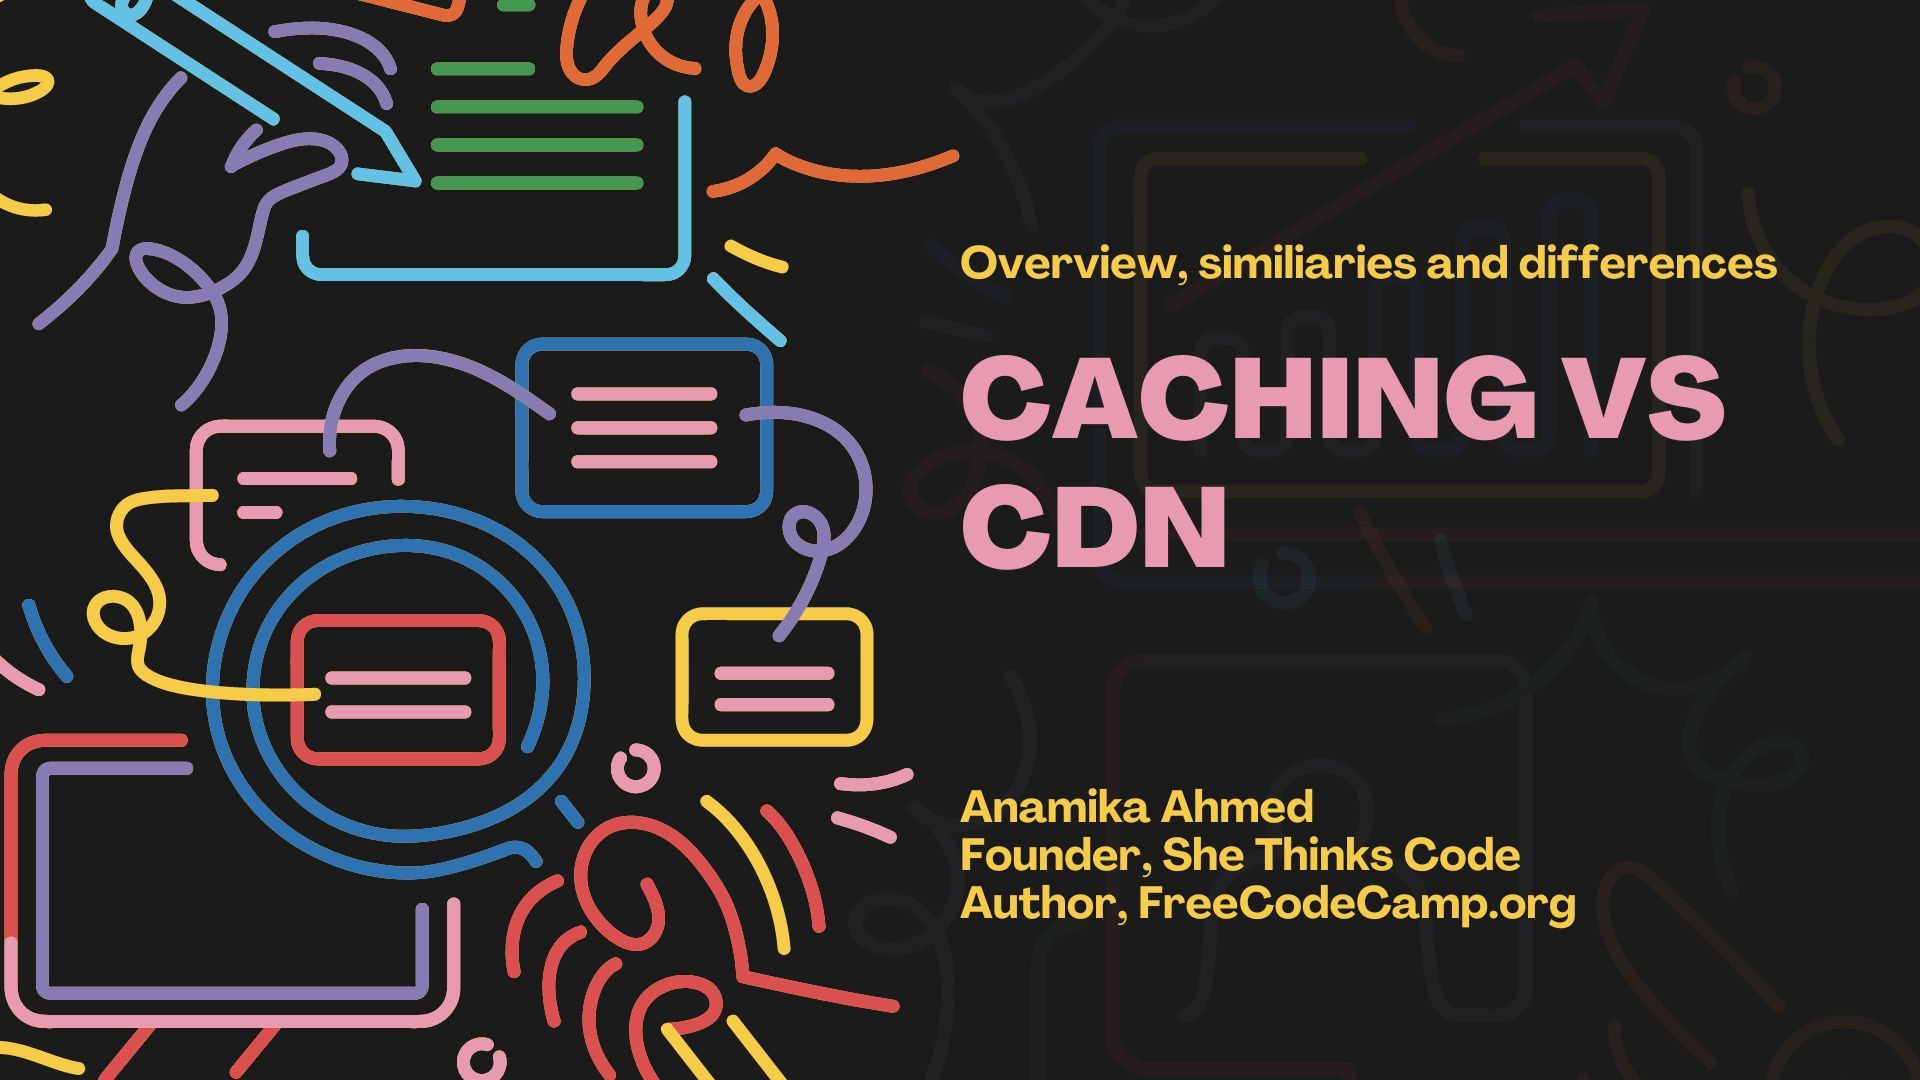 Caching vs Content Delivery Networks – What's the Difference?